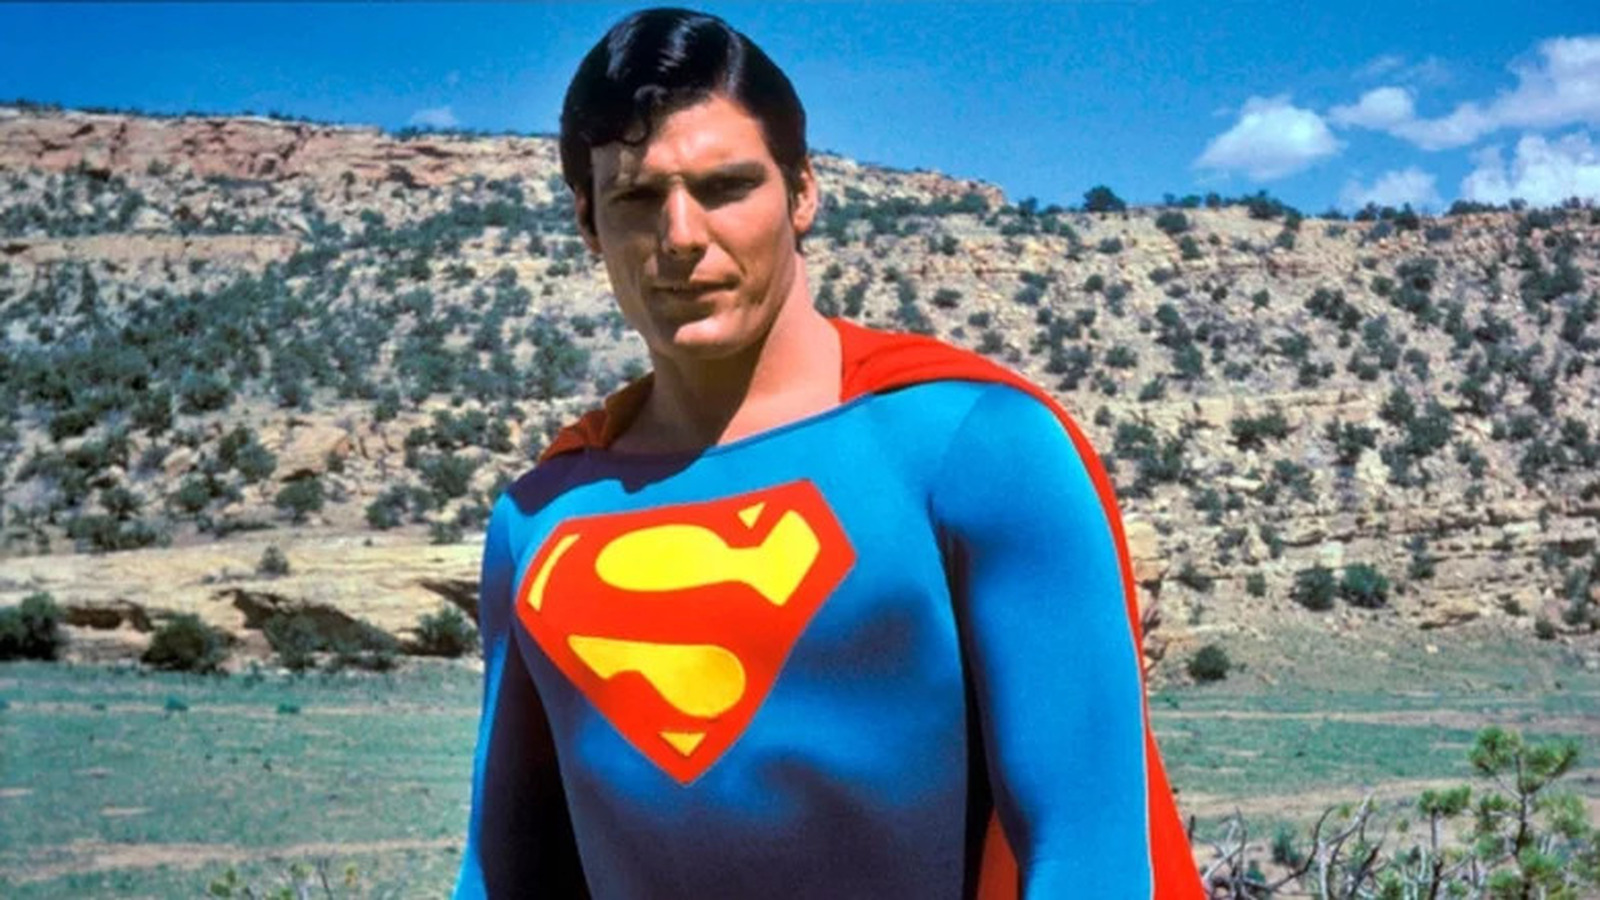 #Christopher Reeve’s Superman Performance Pushed Robin Williams To Play Popeye